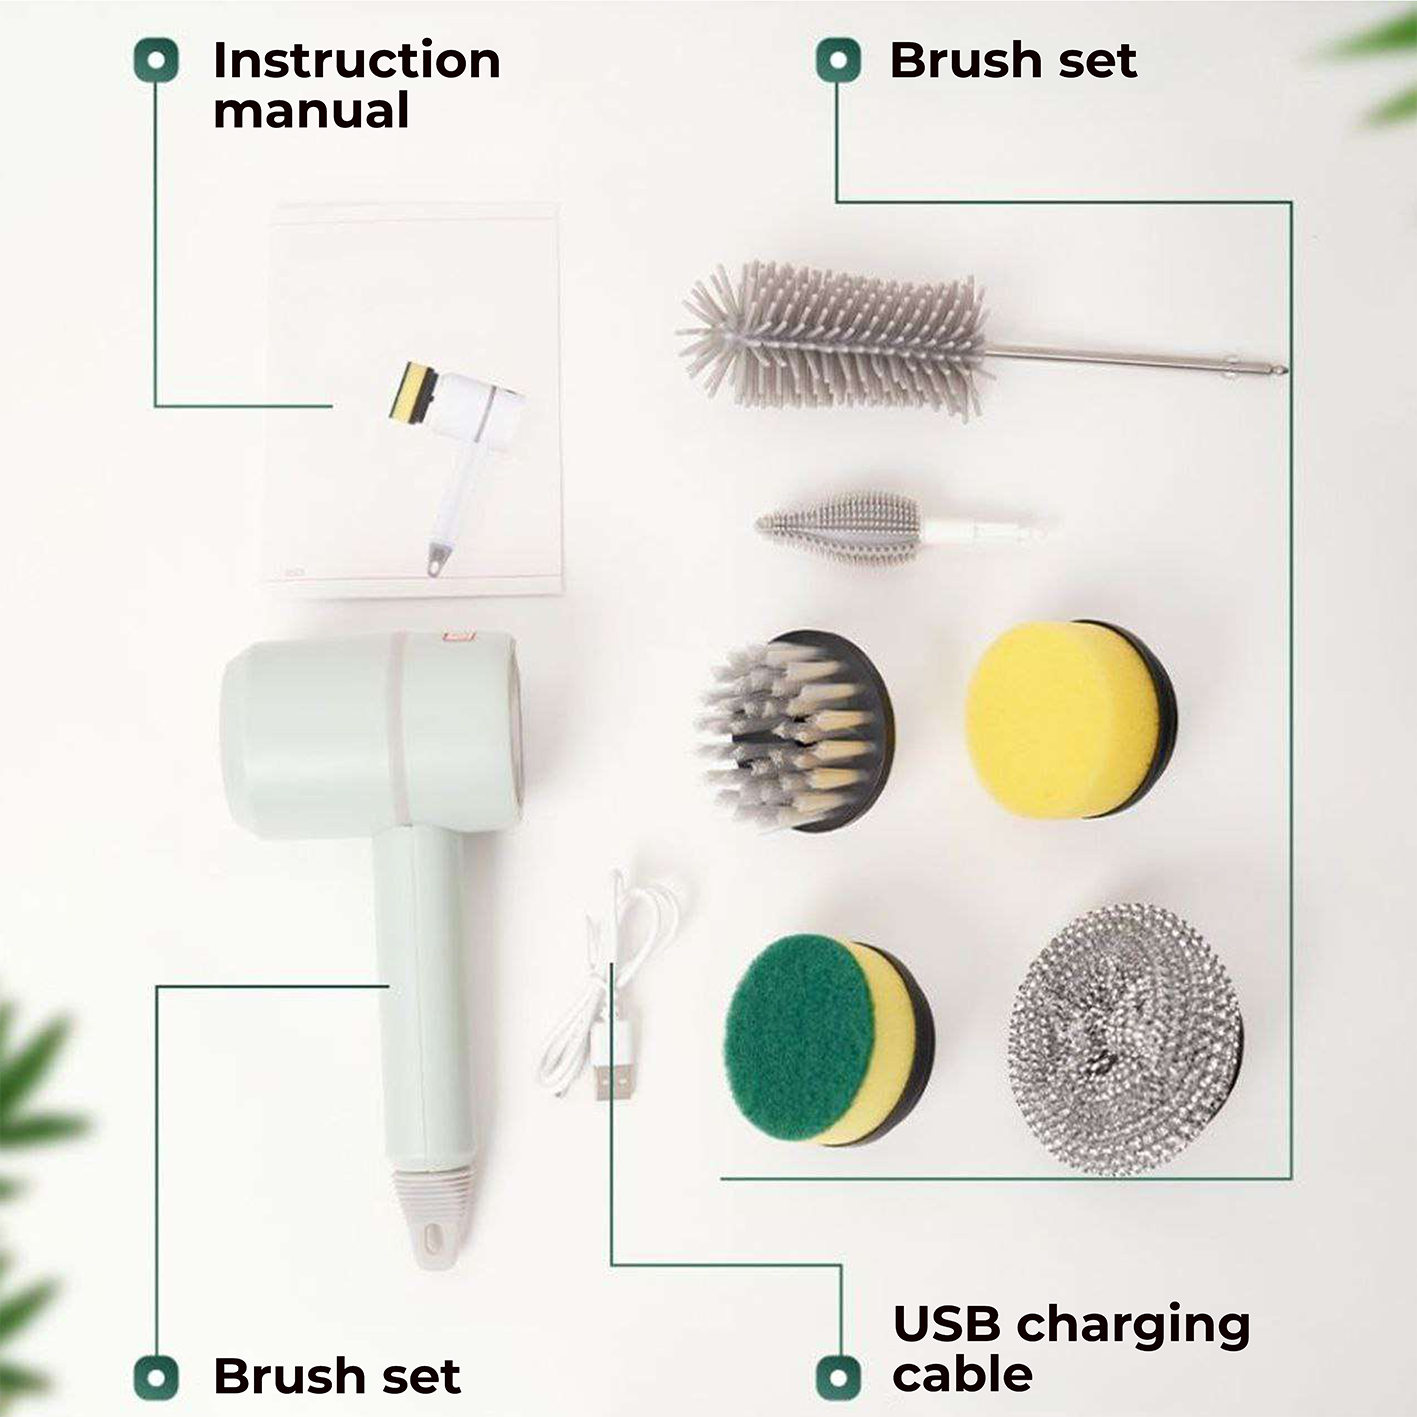 "Detailed display of the SpotLess scrubber essential cleaning kit including multiple brush types, scouring pads, USB cable, and an instruction manual, ideal for comprehensive home cleaning"